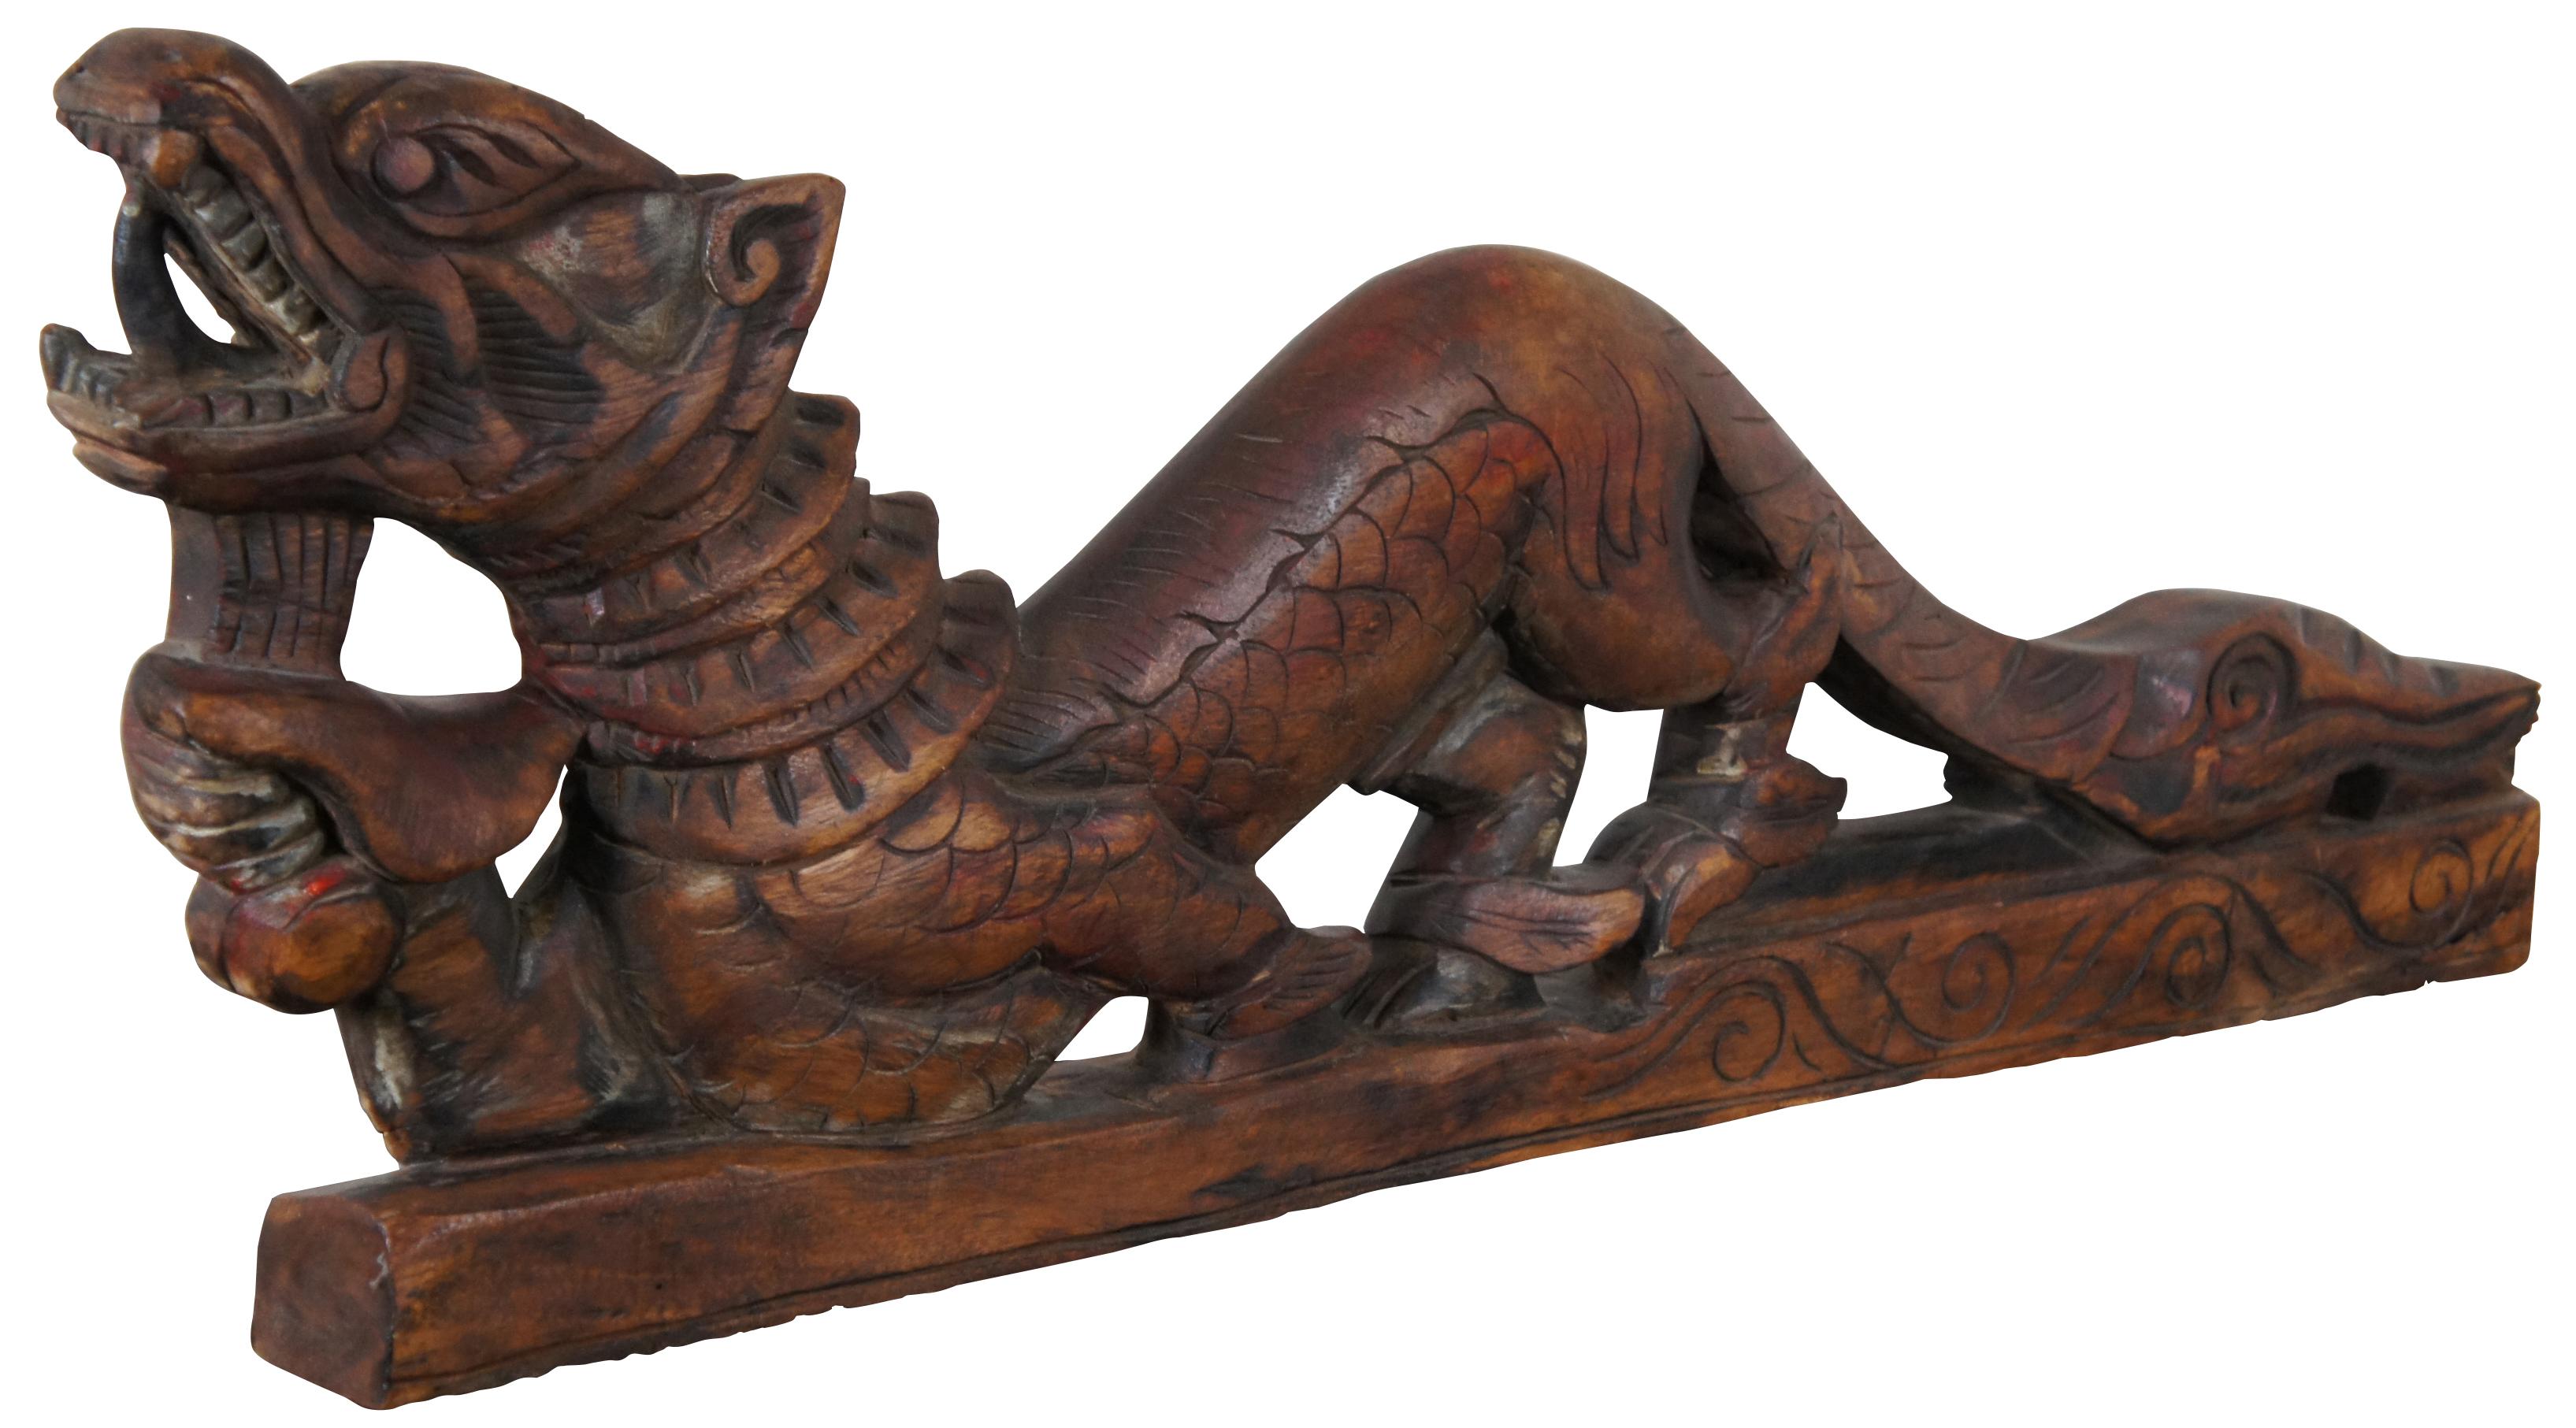 Antique rosewood Chinese carved dragon or serpent sculpture. A great pediment or embellishment for use along a table or mounted to a wall as a plaque. Measures: 36